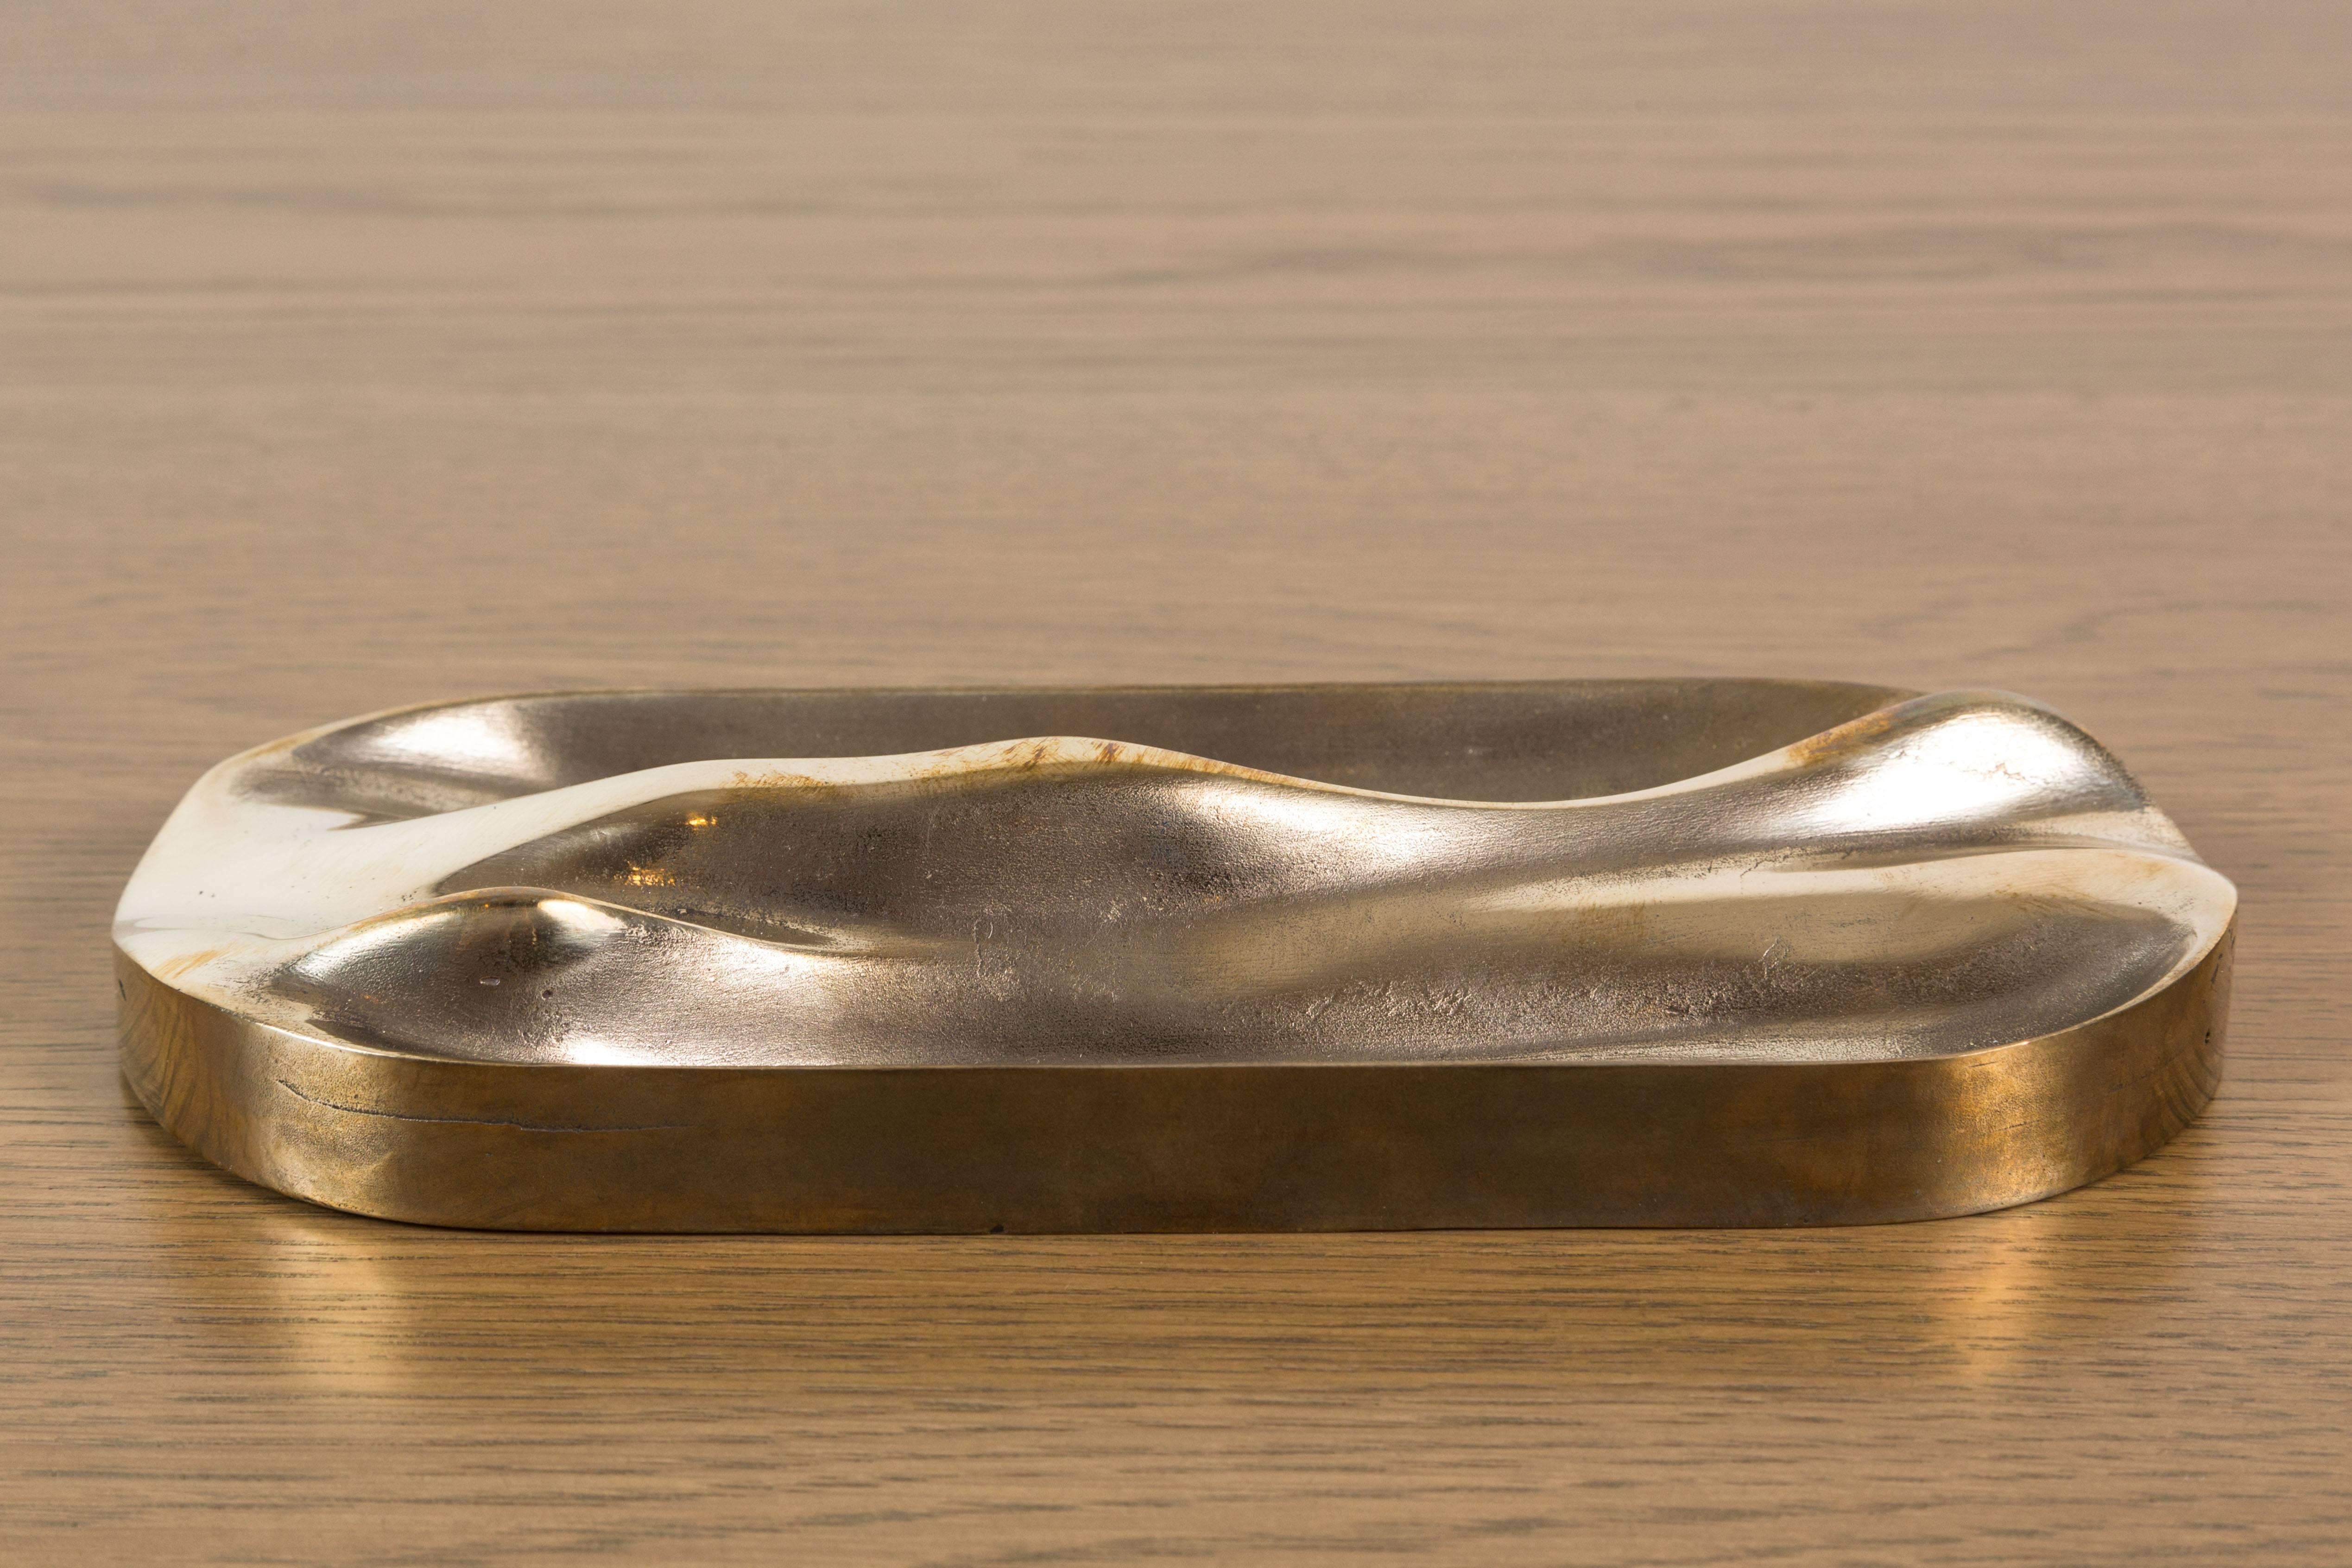 Small Bronze Tray by Artist Vincent Pocsik for Lawson-Fenning, in Stock 2